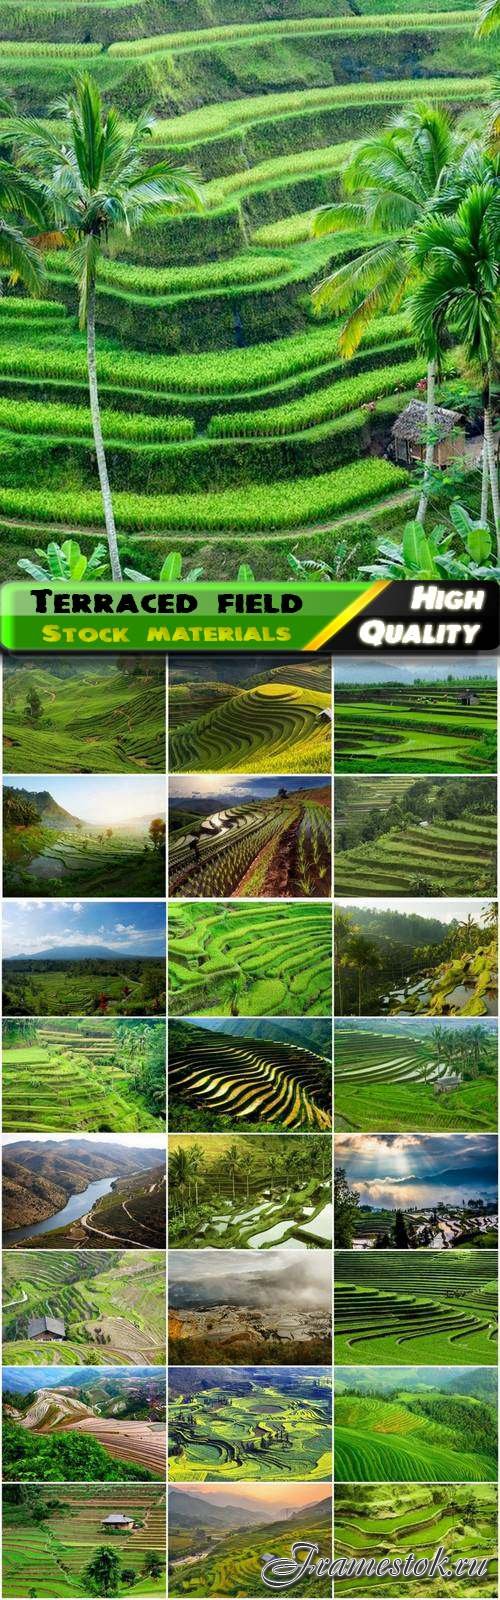 Nature landscape with green terraced field - 25 HQ Jpg